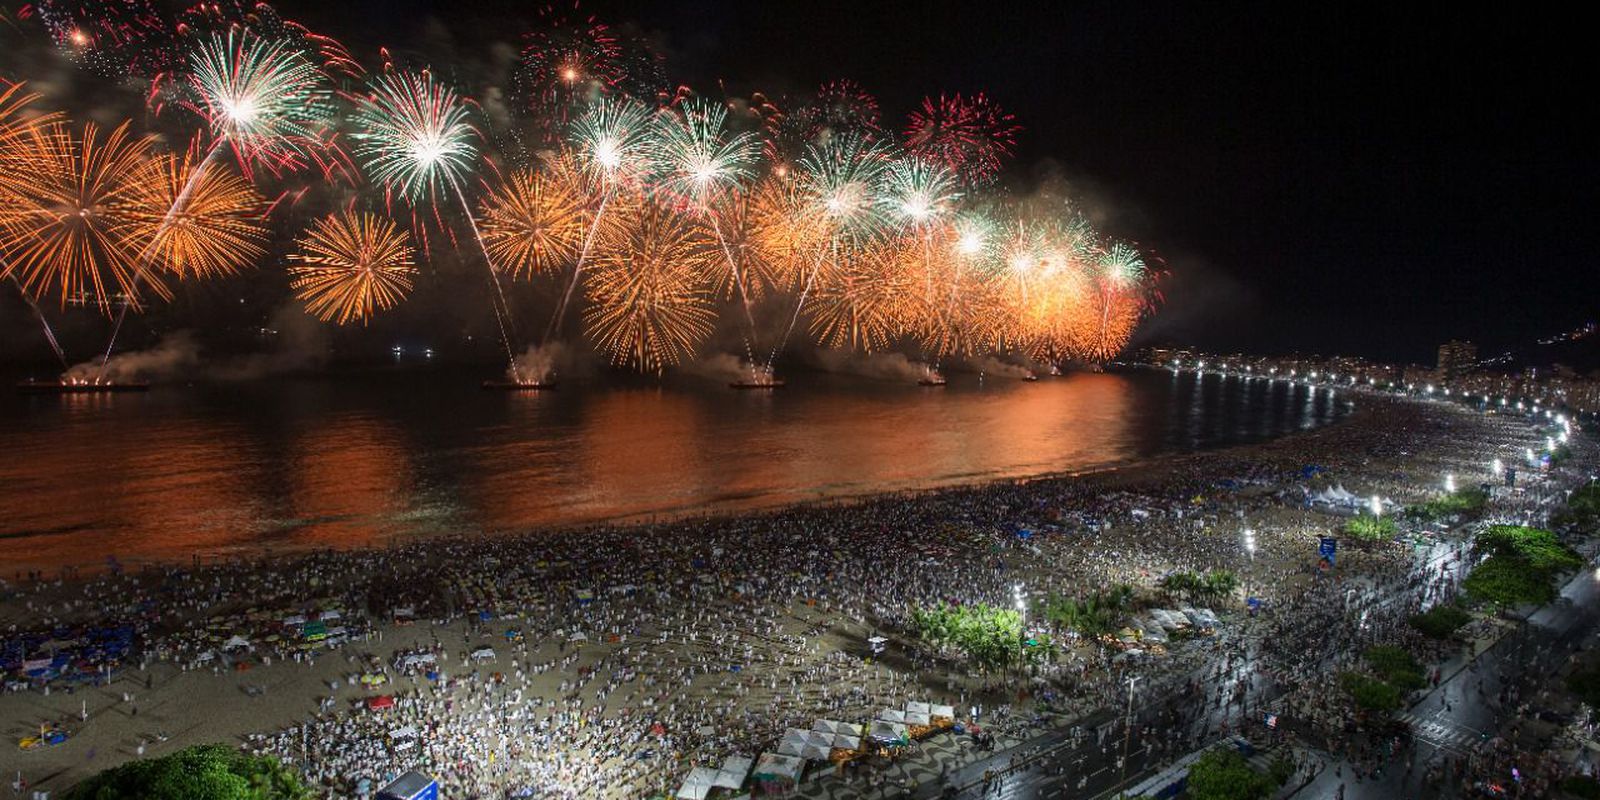 Rio starts selling Metro tickets for New Year's Eve in Copacabana